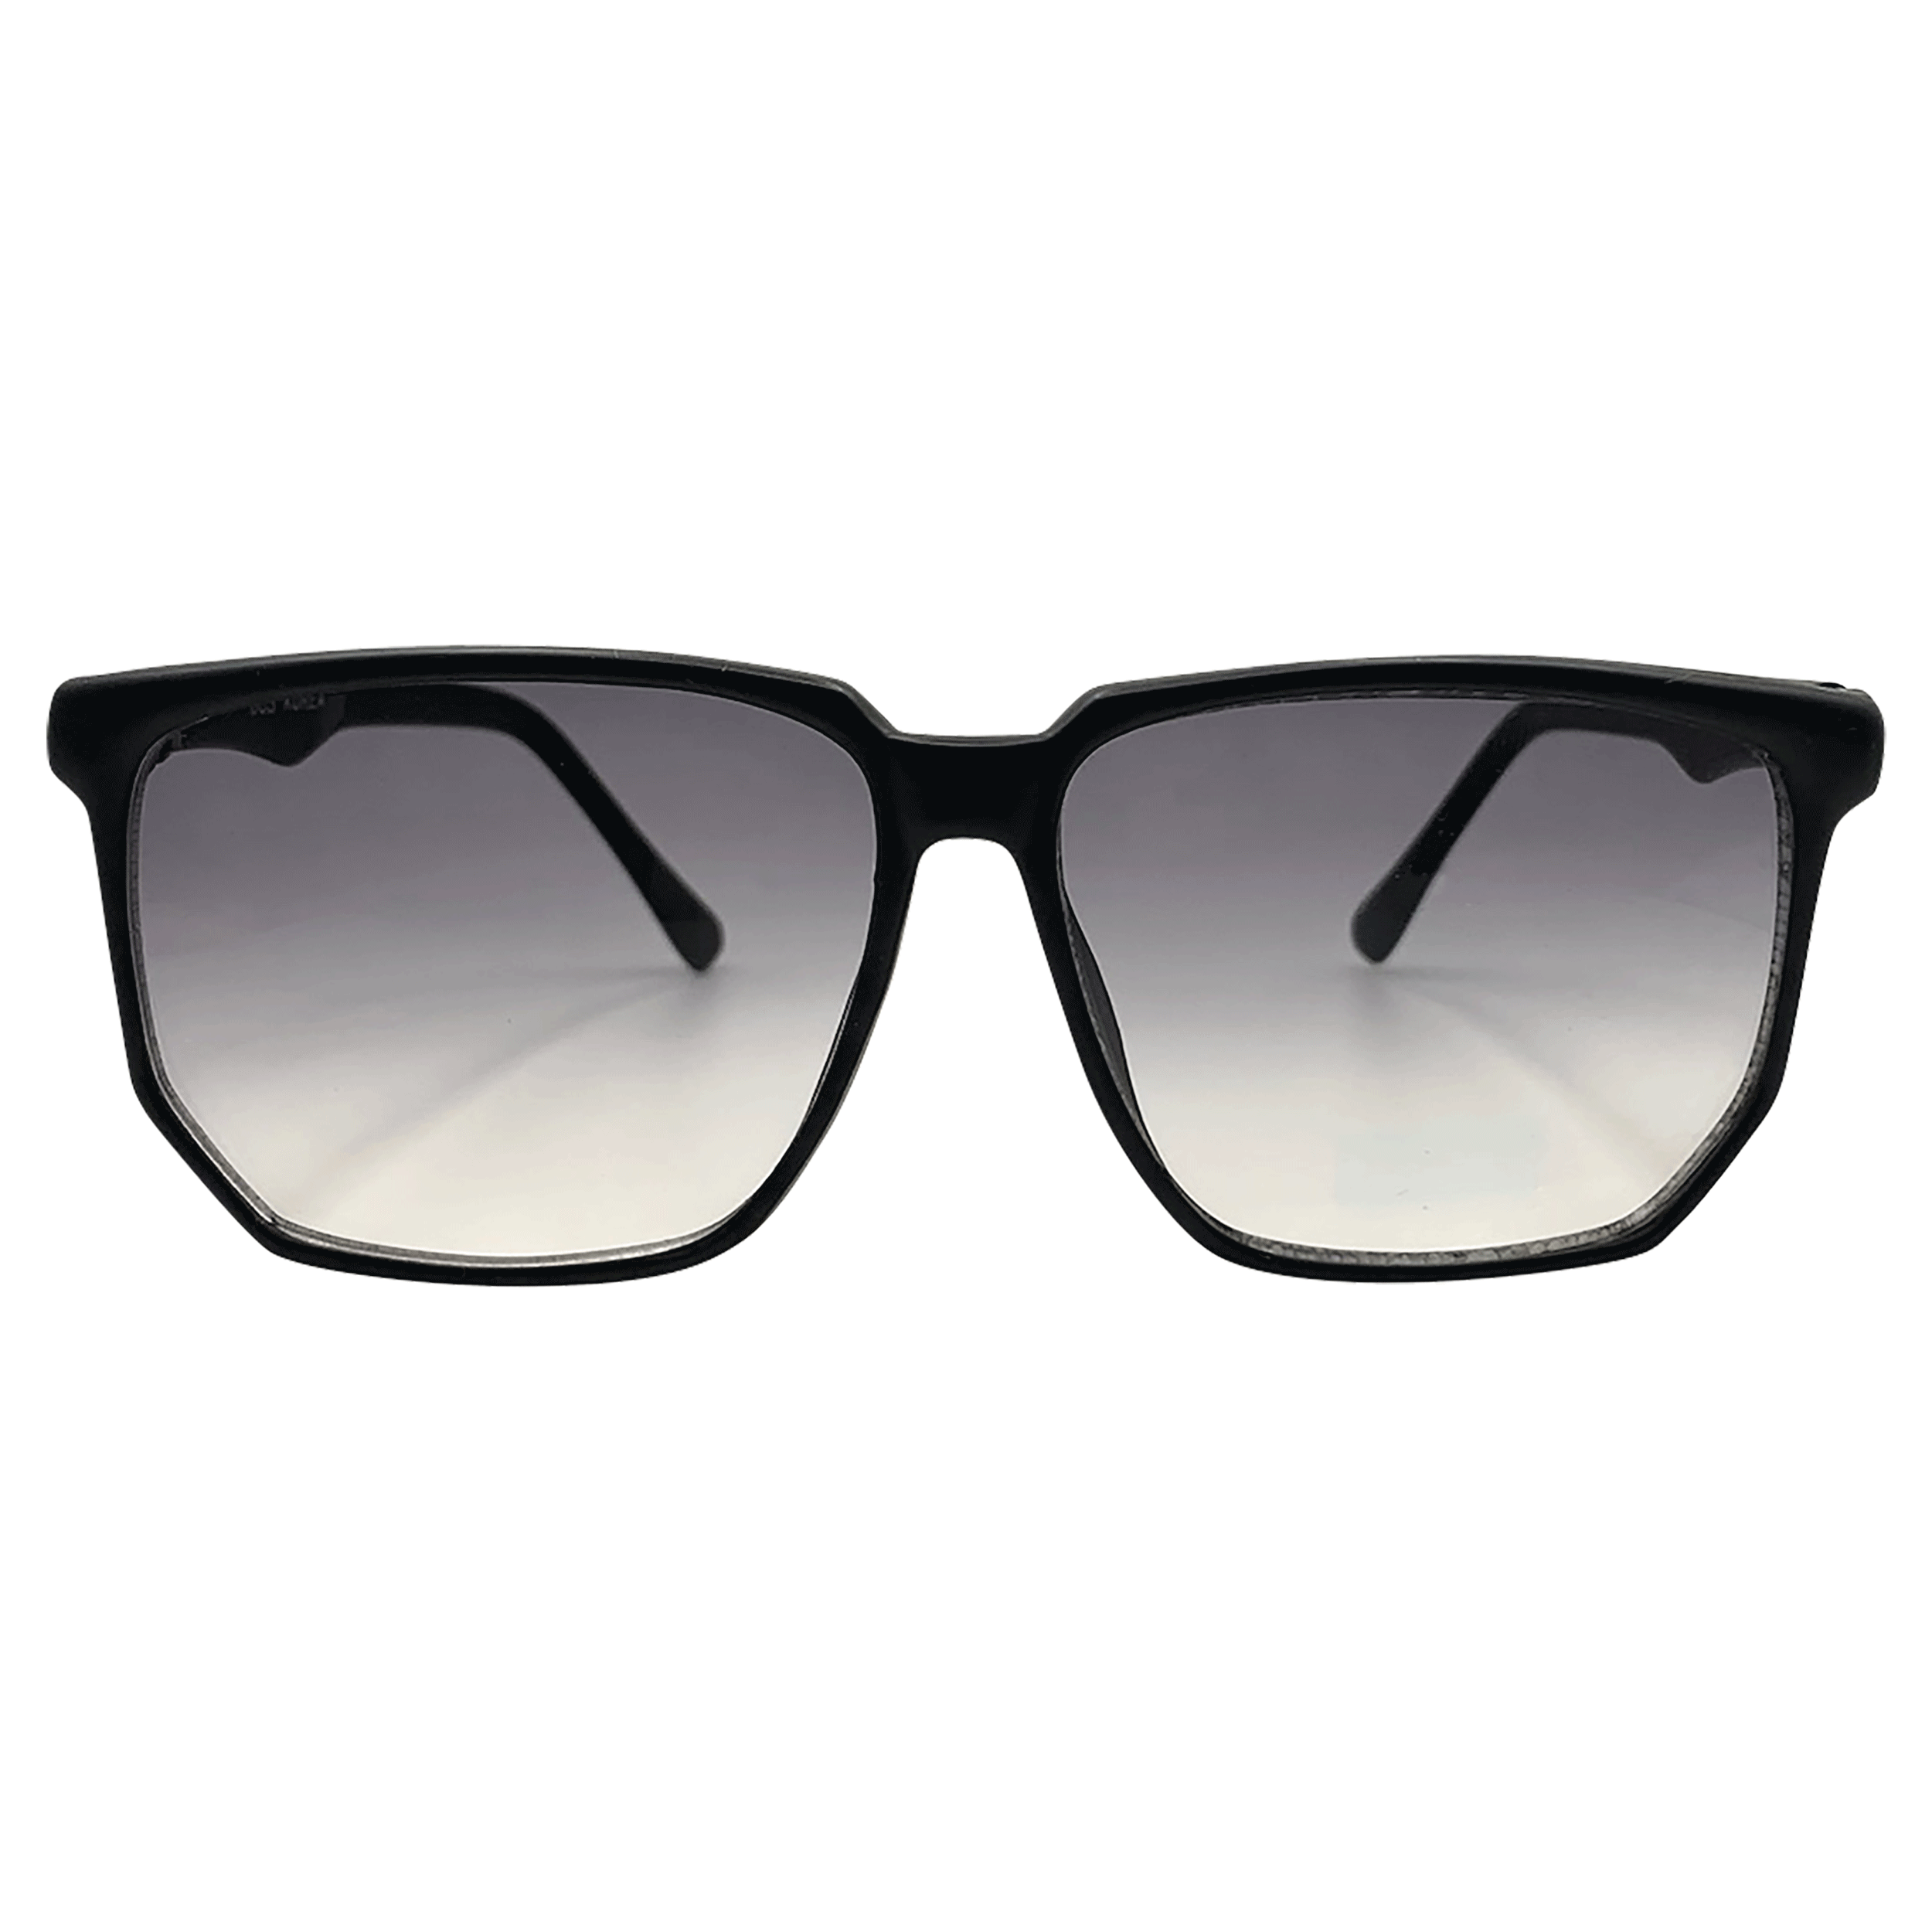 WILLOWY Large Square Classic Vintage Sunglasses